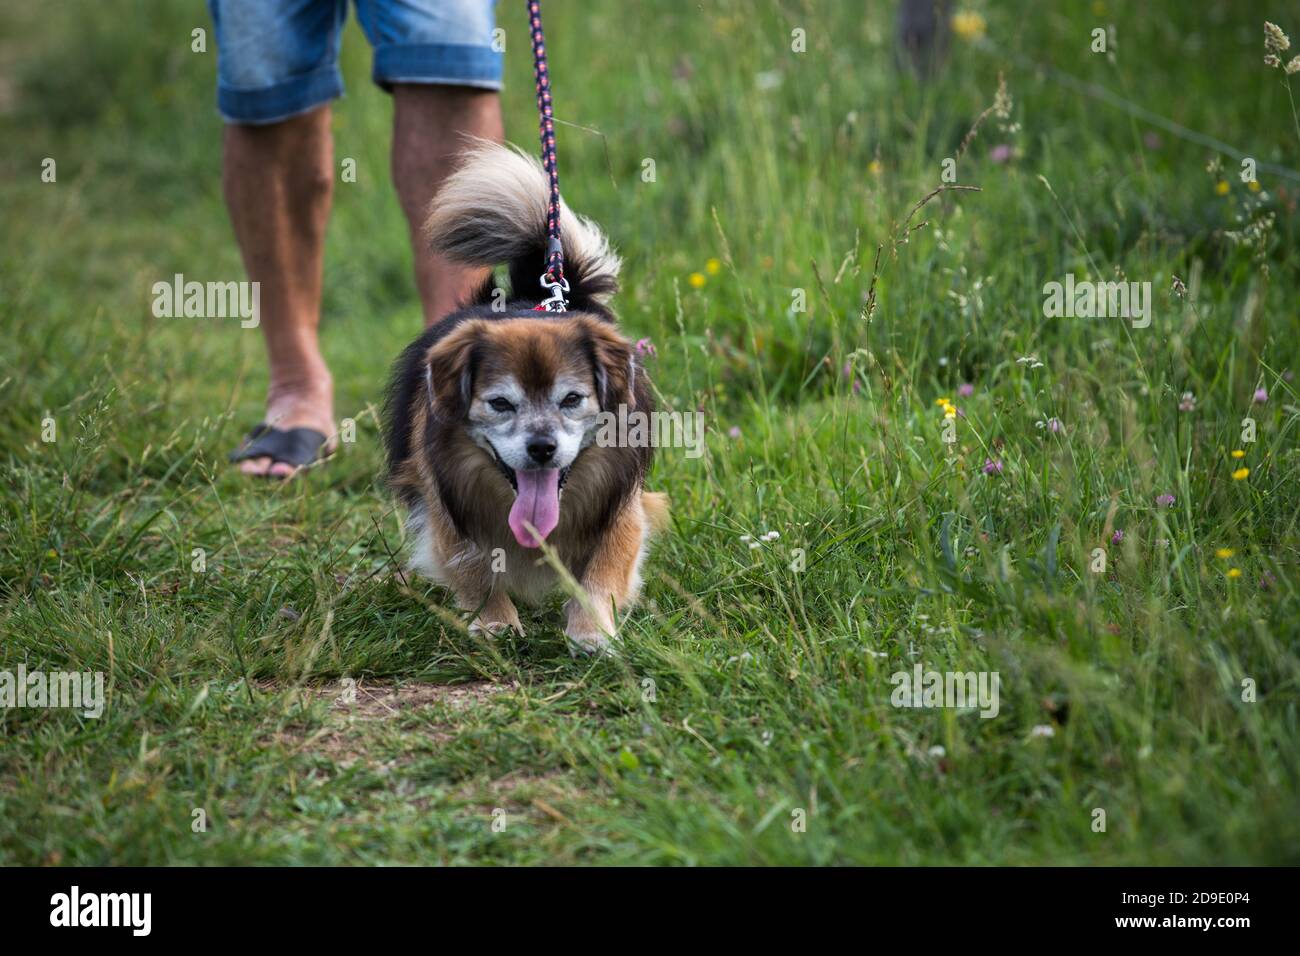 Small dog walking on the grass with its owner in the back Stock Photo